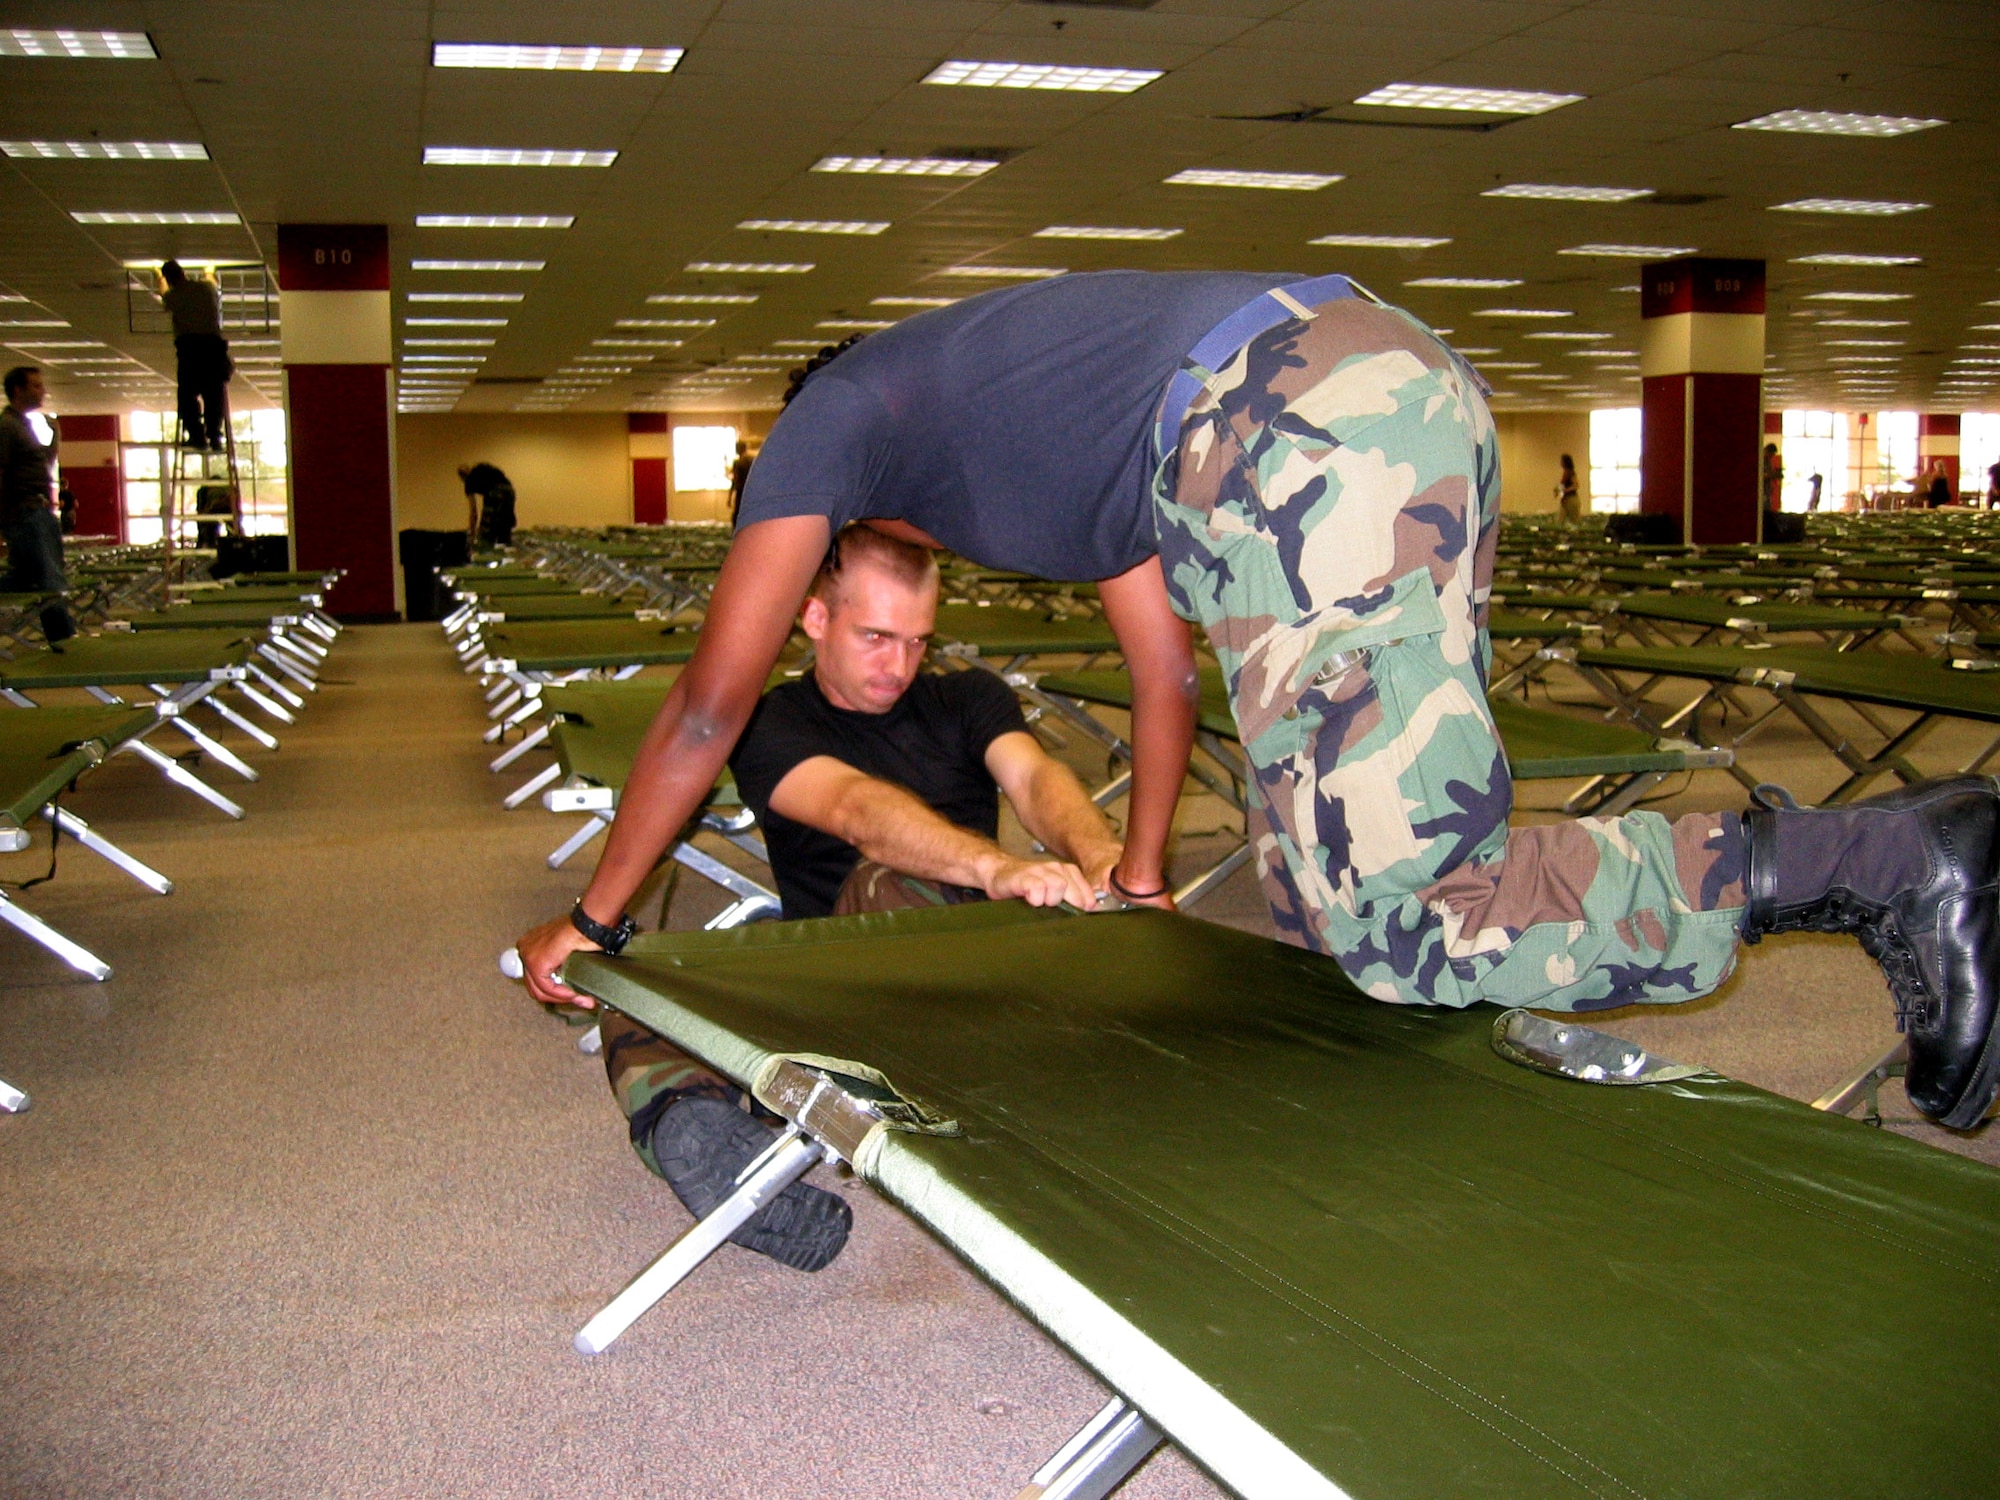 SAN ANTONIO -- Airman Yohanna Tucker helps Airman 1st Class Daniel Morton put one of about 2,500 cots together at a center to house people displaced by Hurricane Katrina. In all, 200 Airmen from nearby Lackland Air Force Base helped tear down modular office furniture in a 350,000 square foot building and set up the cots. Airman Tucker is assigned to the 331st Training Squadron, and Airman Morton is assigned to the 323rd TRS.  (U.S. Air Force photo by Tech. Sgt. J.C. Woodring)